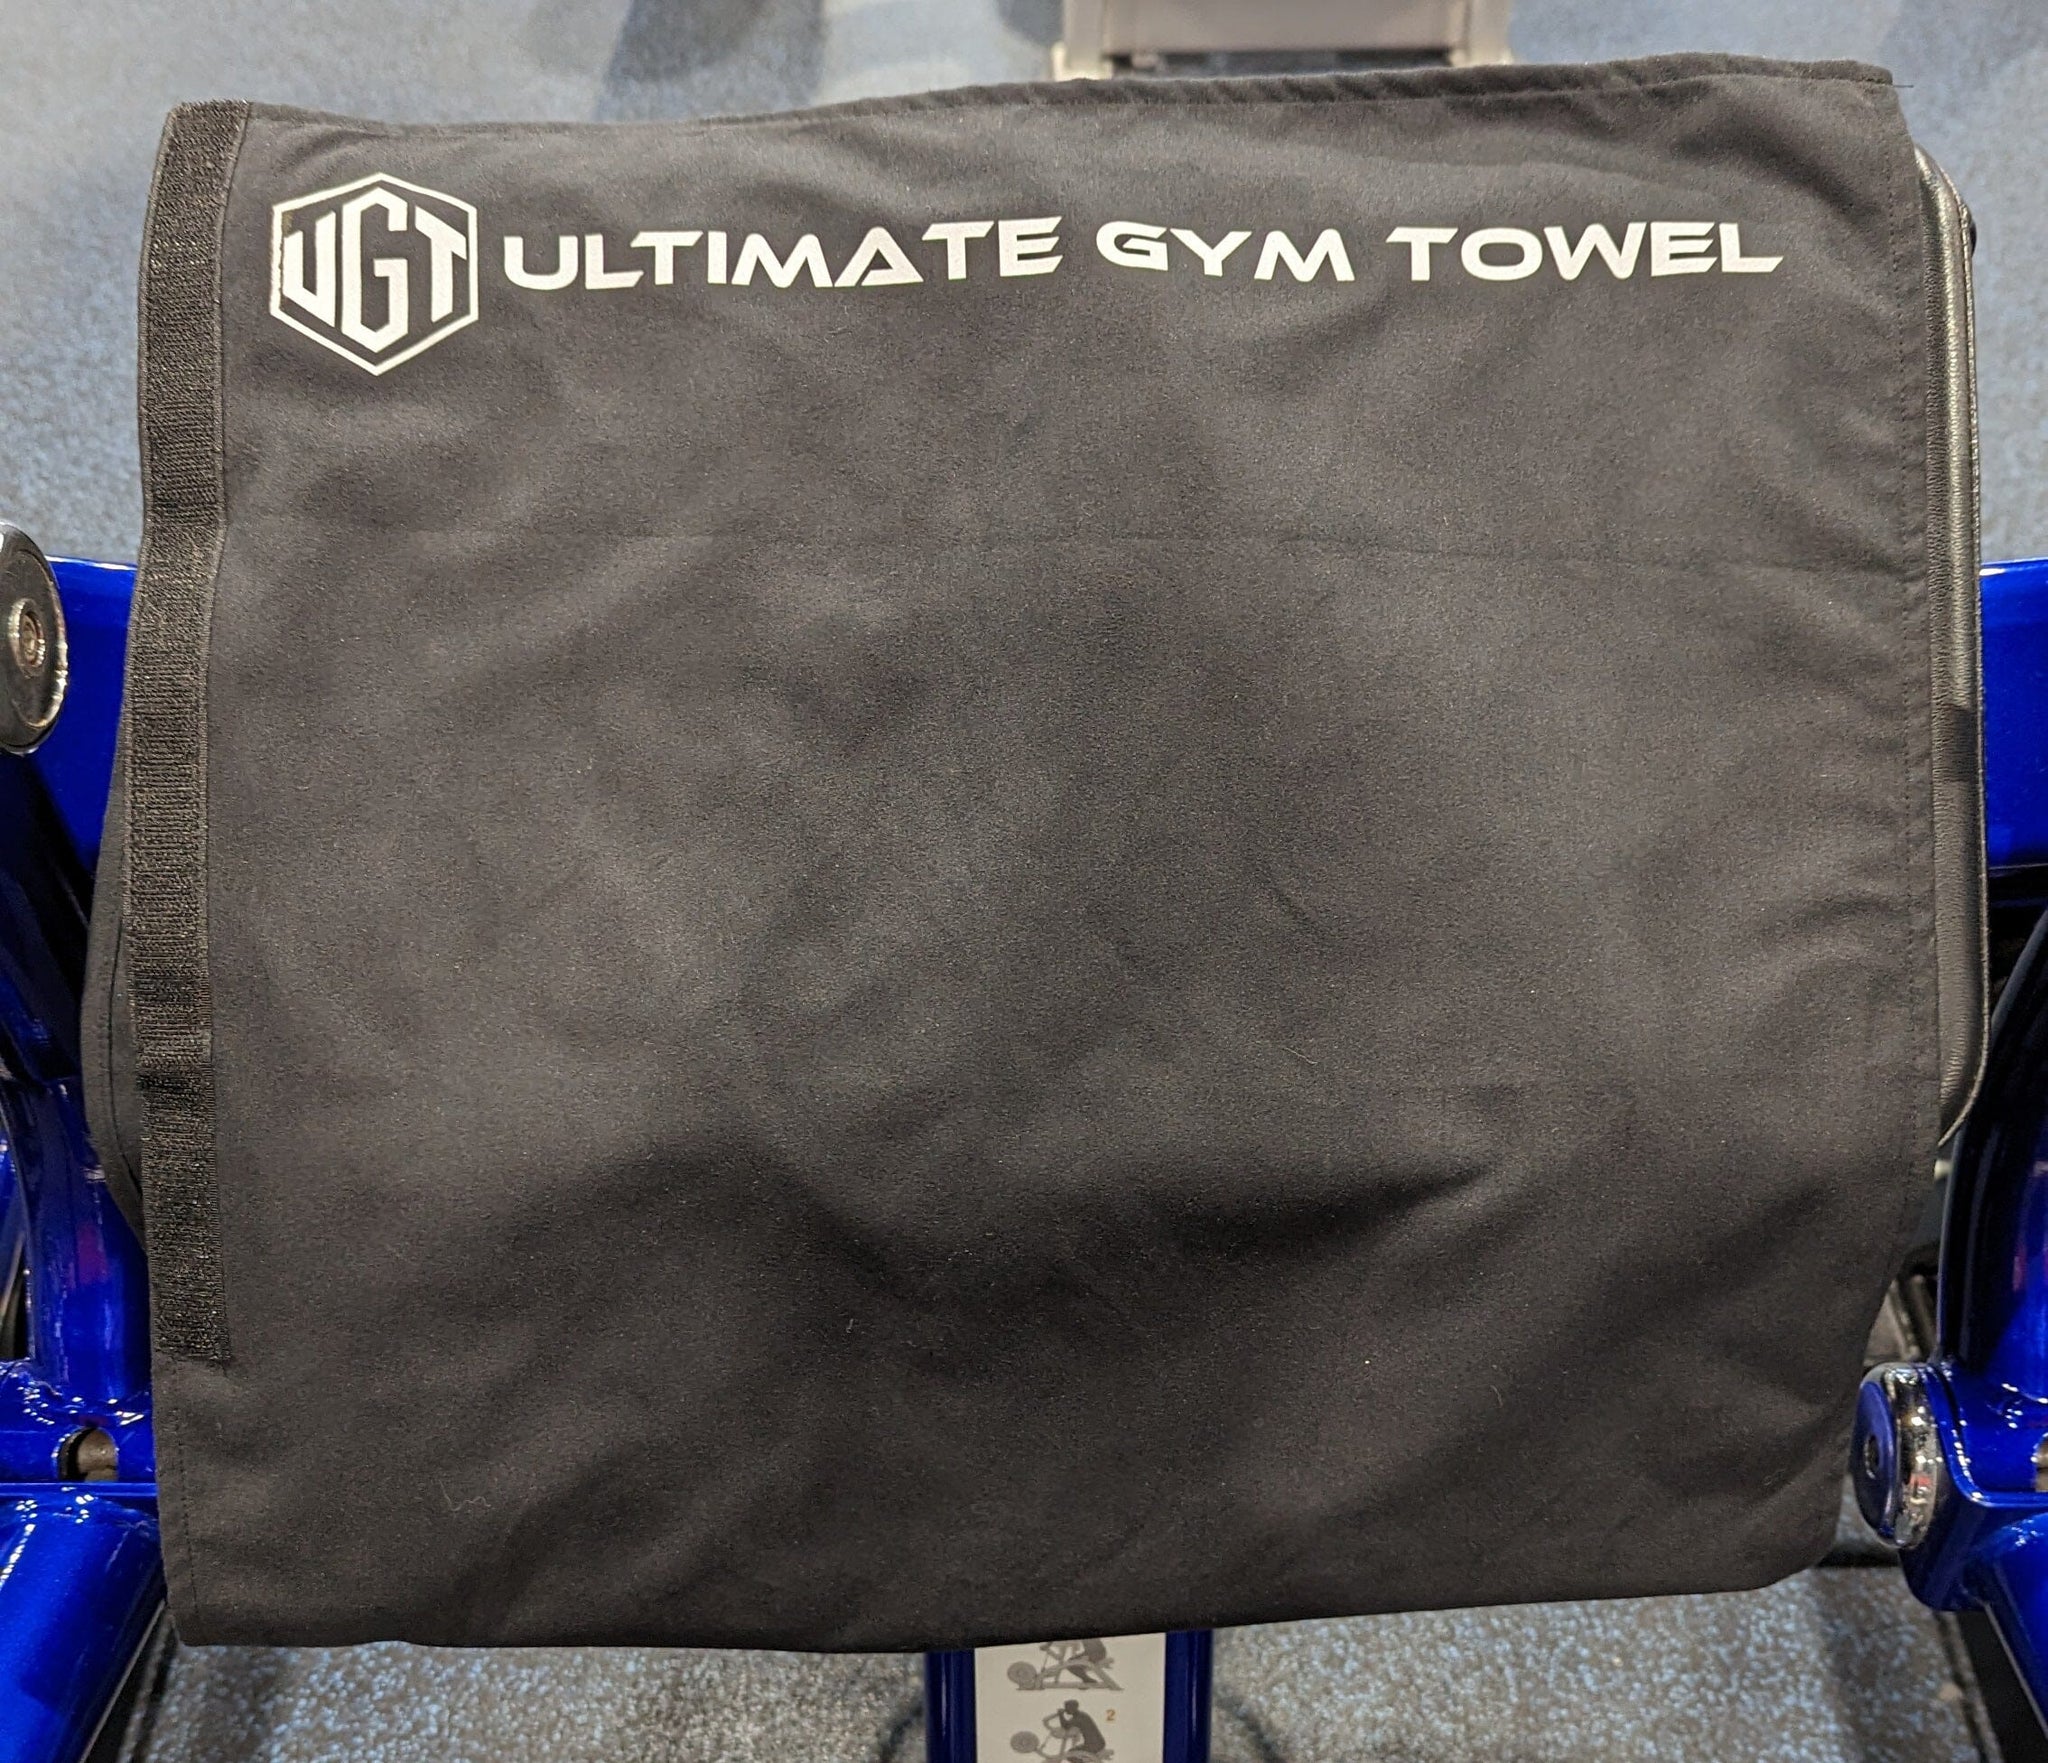 Why You Need the Ultimate Gym Towel